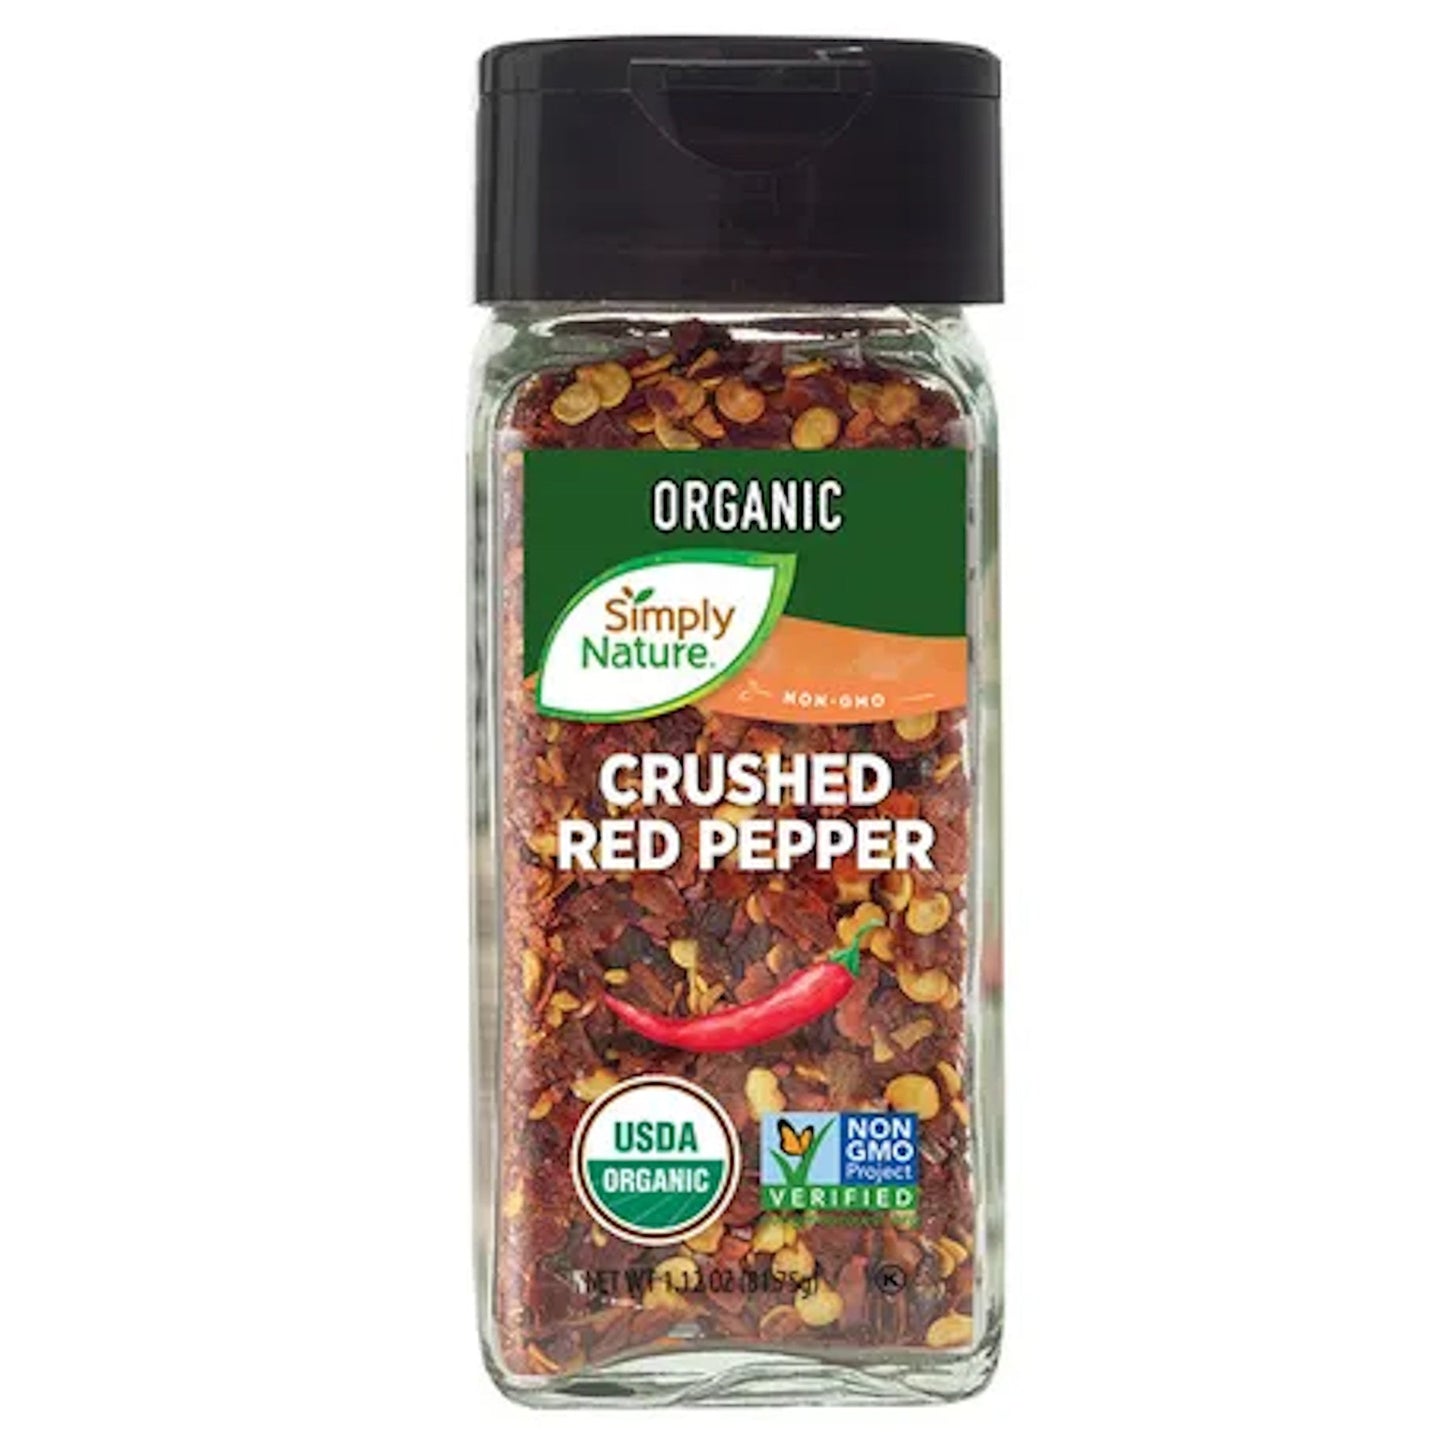 Simply Nature Organic Crushed Red Pepper 1.12 oz - FlavorKicker.com